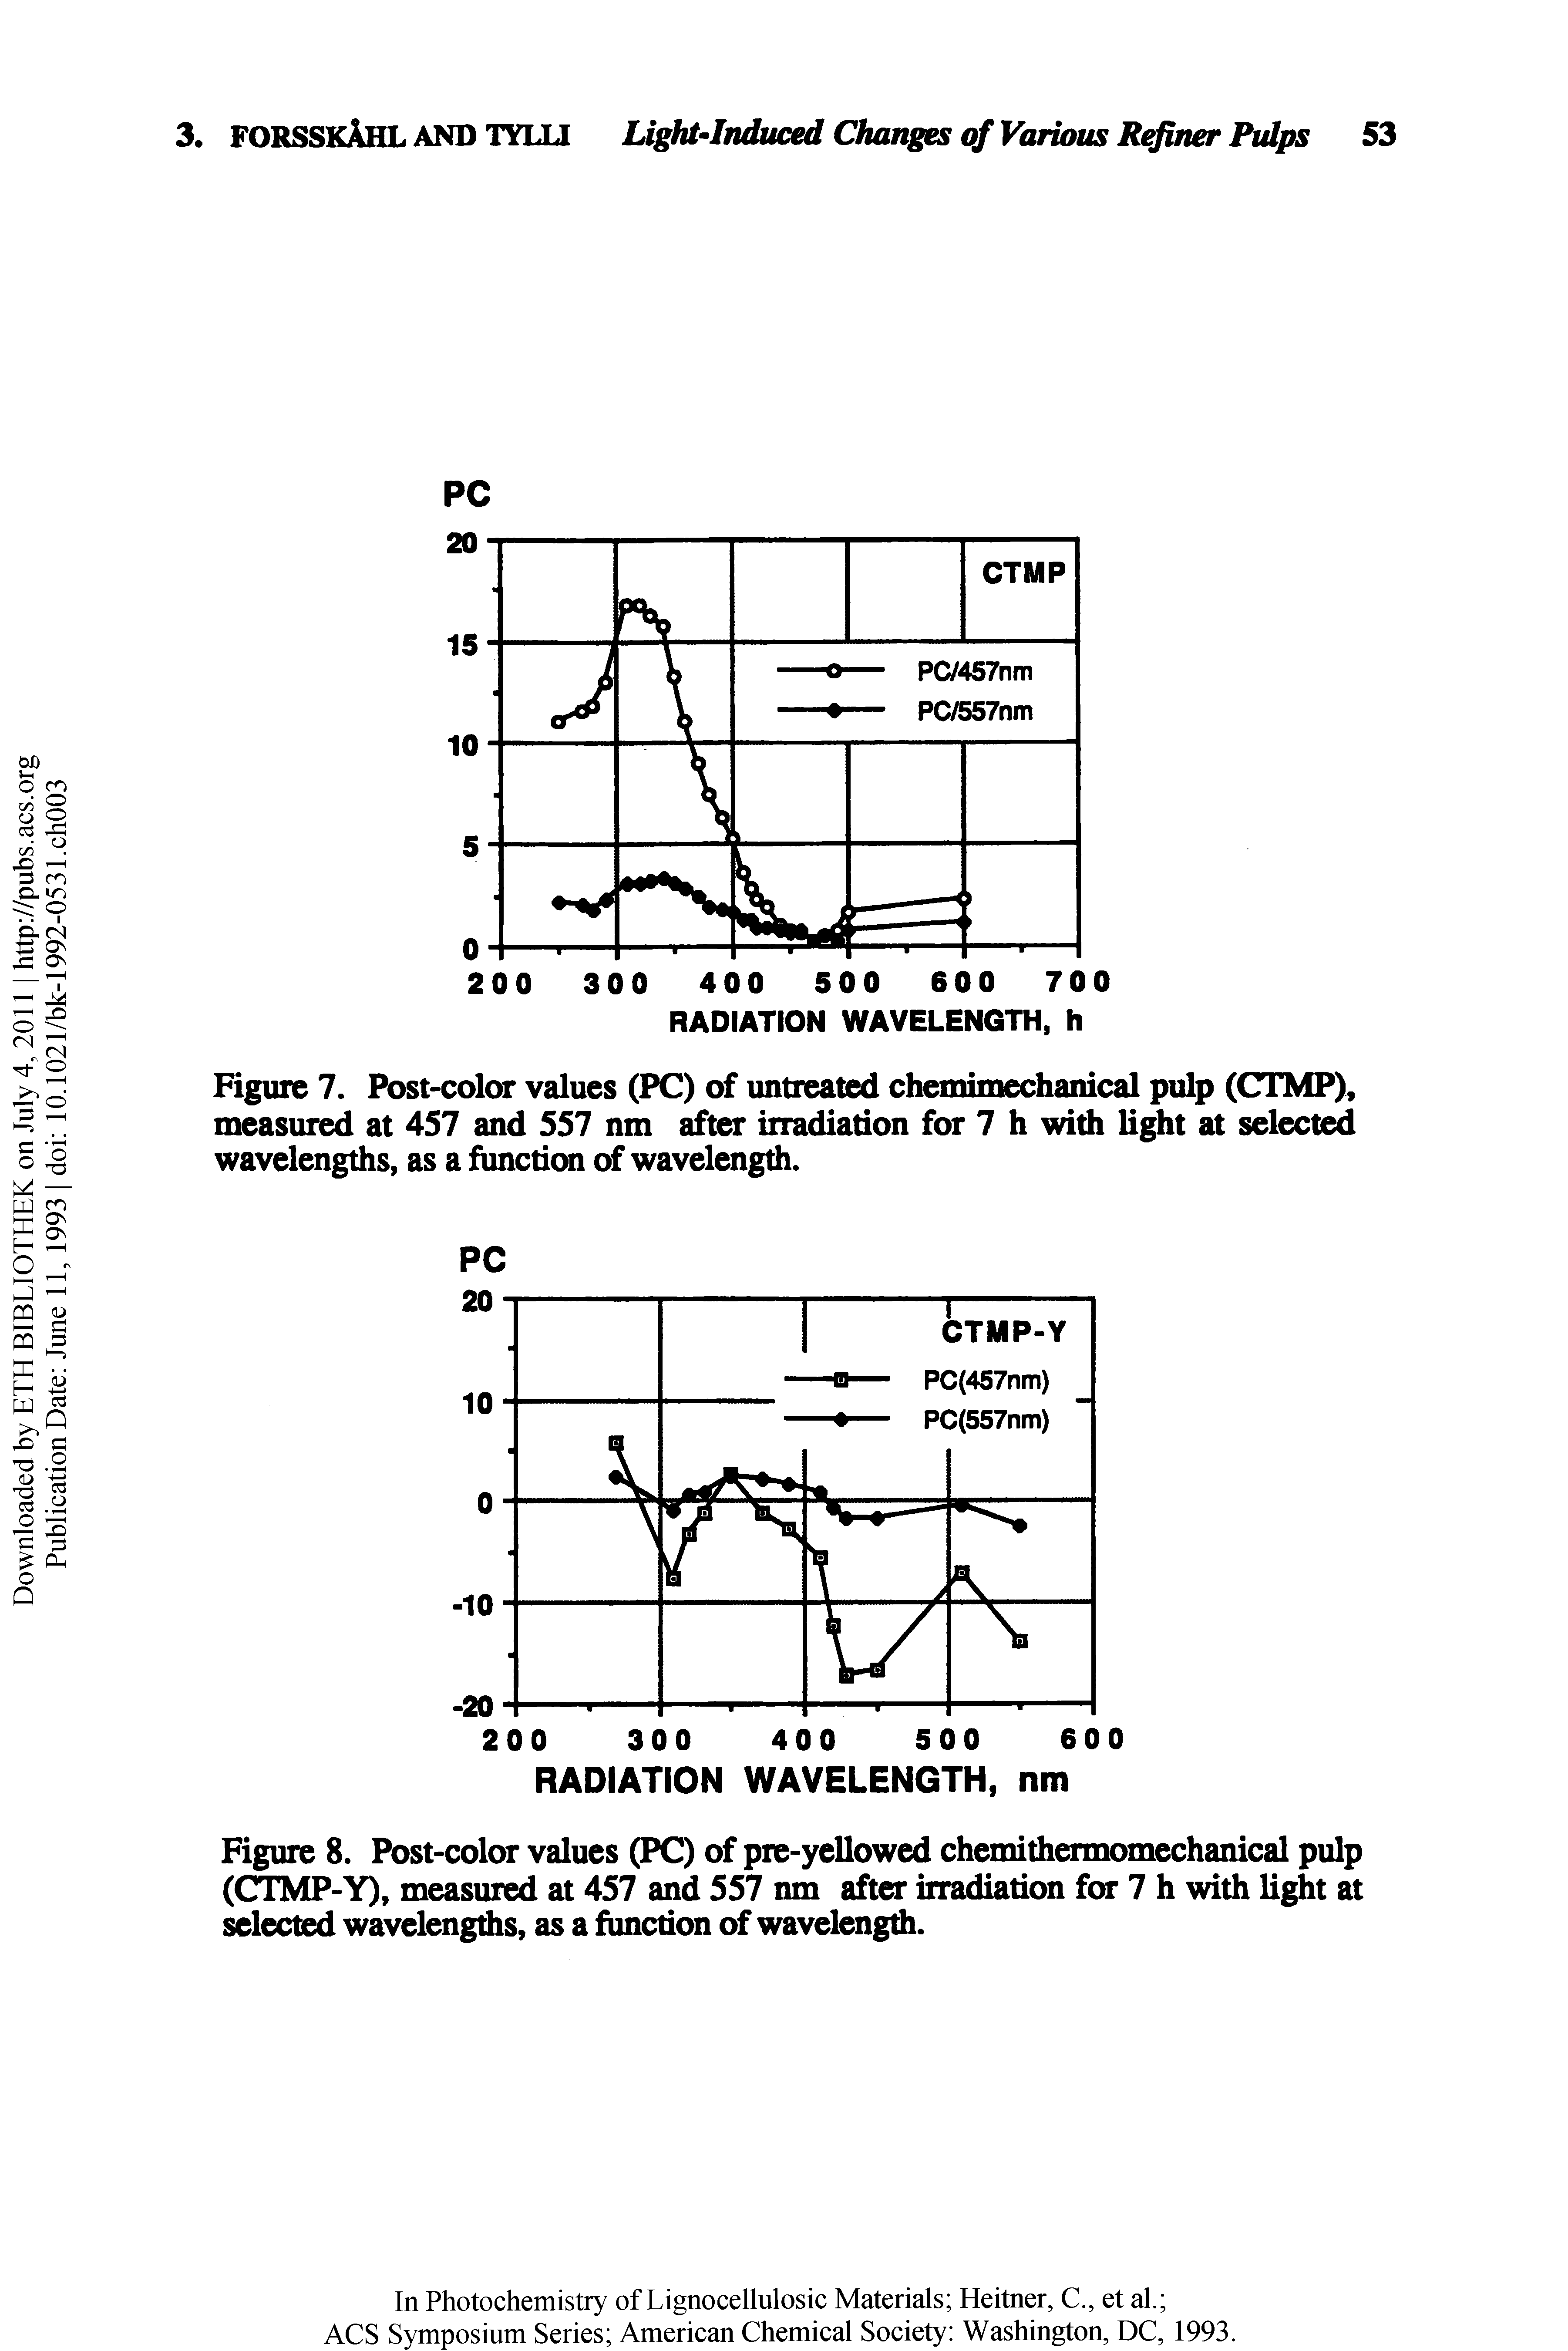 Figure 8. Post-color values (PC) of pre-yellowed chemithermomechanical pulp (CTMP-Y), measured at 457 and 557 nm after irradiation for 7 h with light at selected wavelengths, as a function of wavelength.